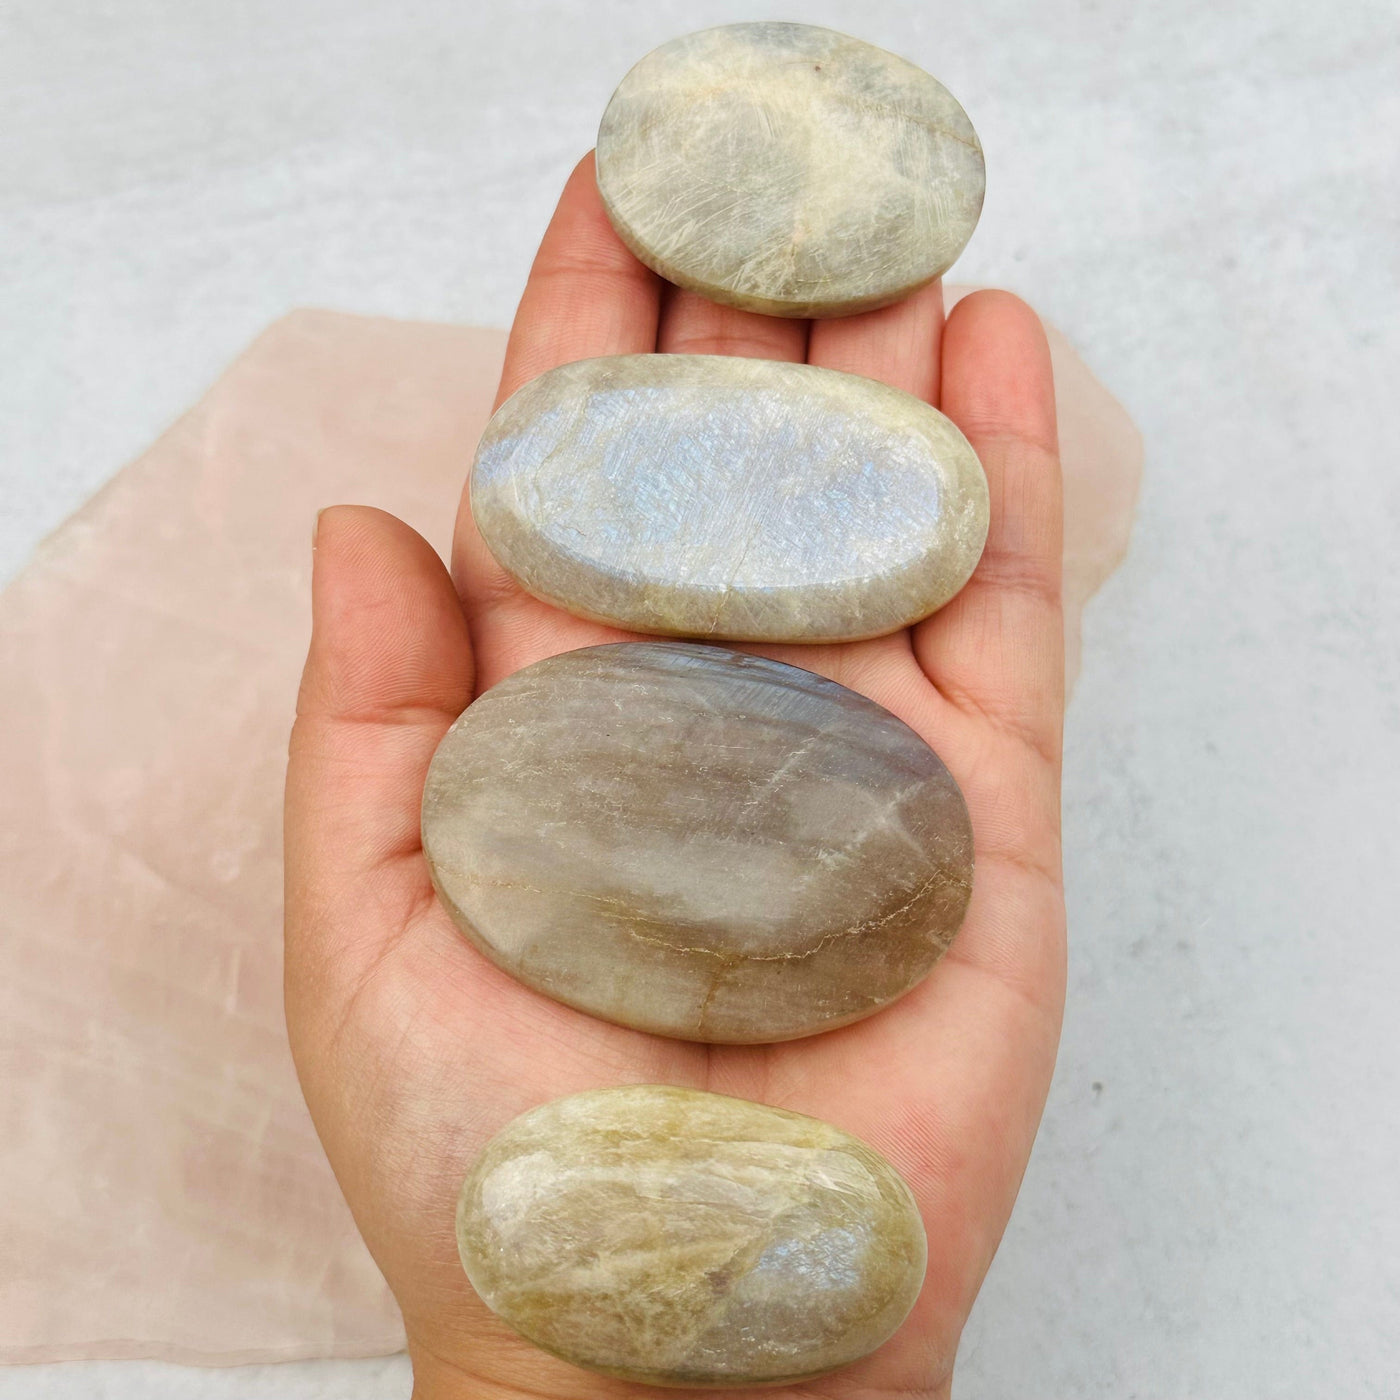 palm stones in hand to show the differences in the sizes 